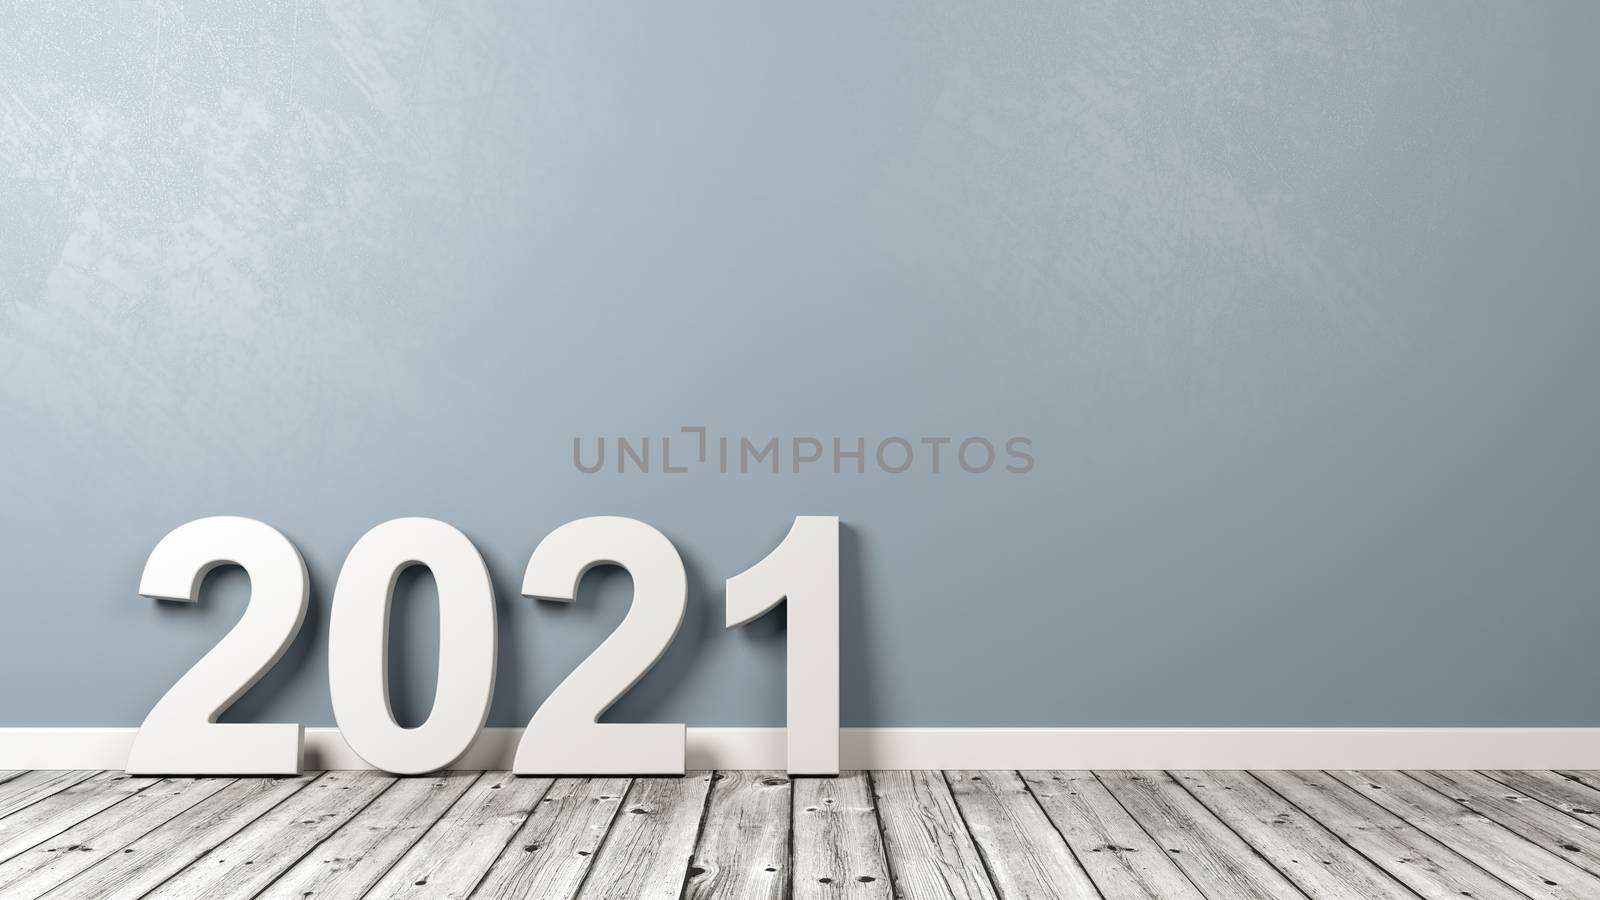 2021 Number Text on Wooden Floor Against Wall by make